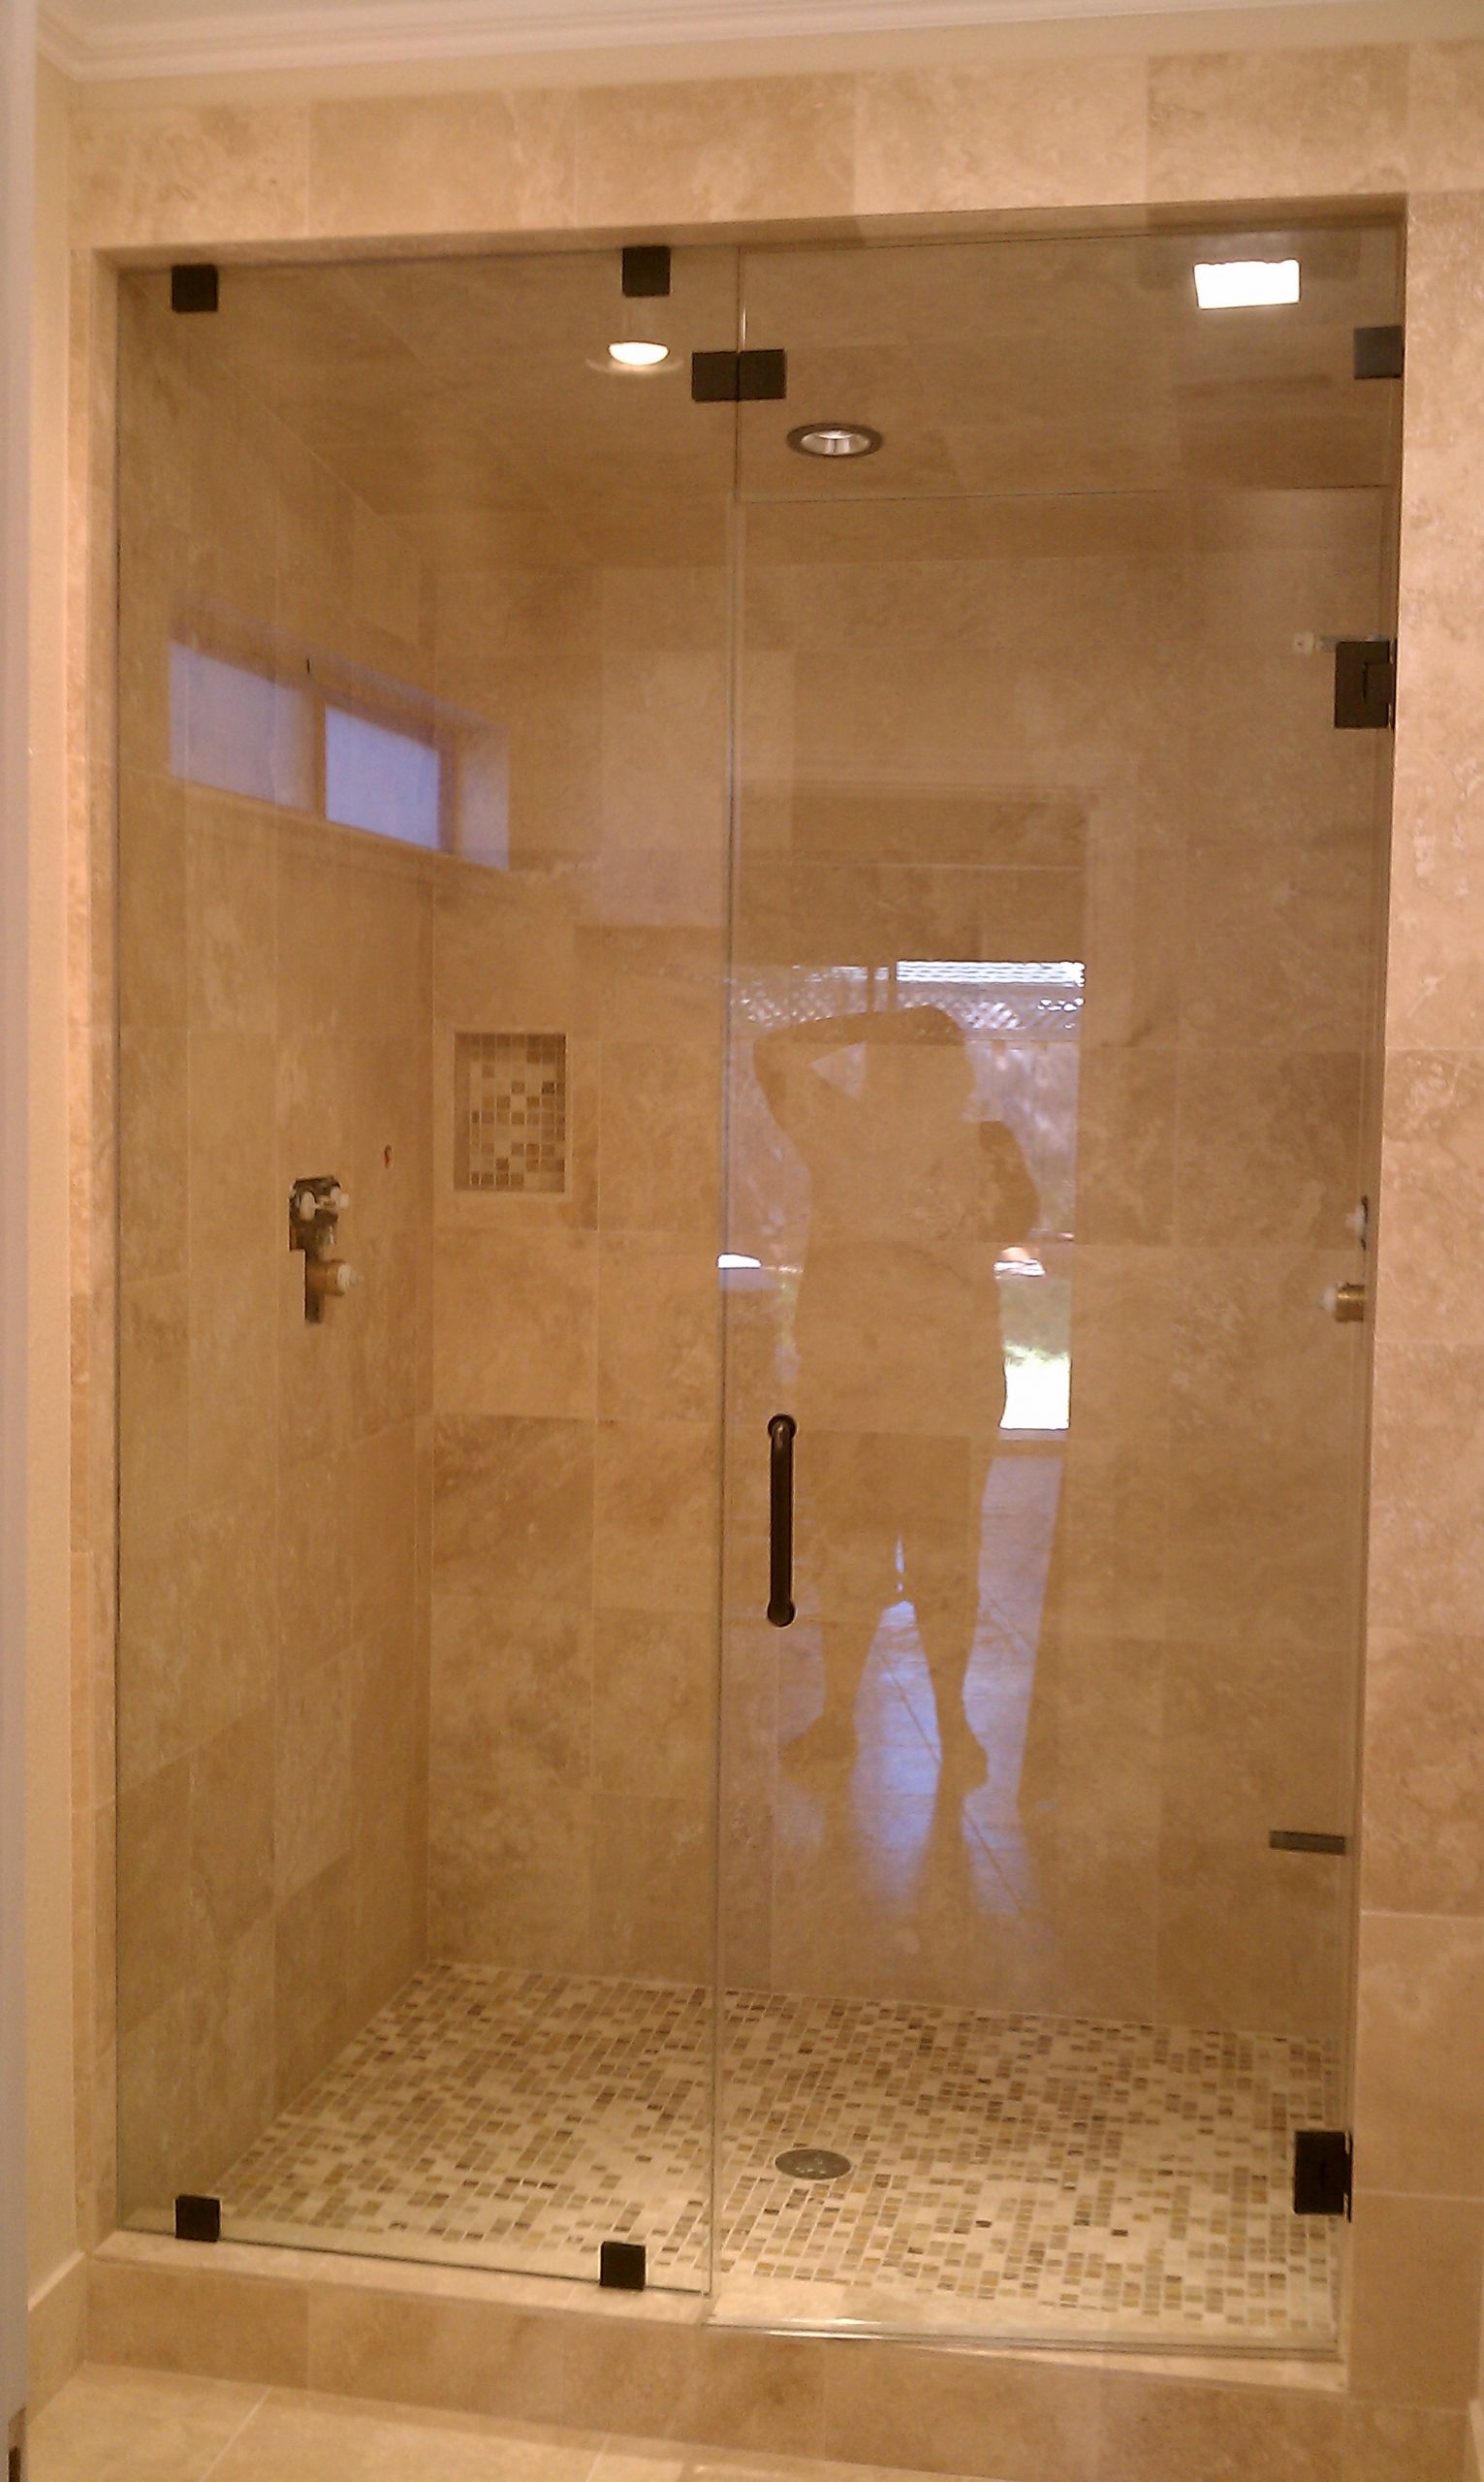 Home Depot Bathroom Shower Tile
 Bathroom Give Your Shower Some Character With New Lowes